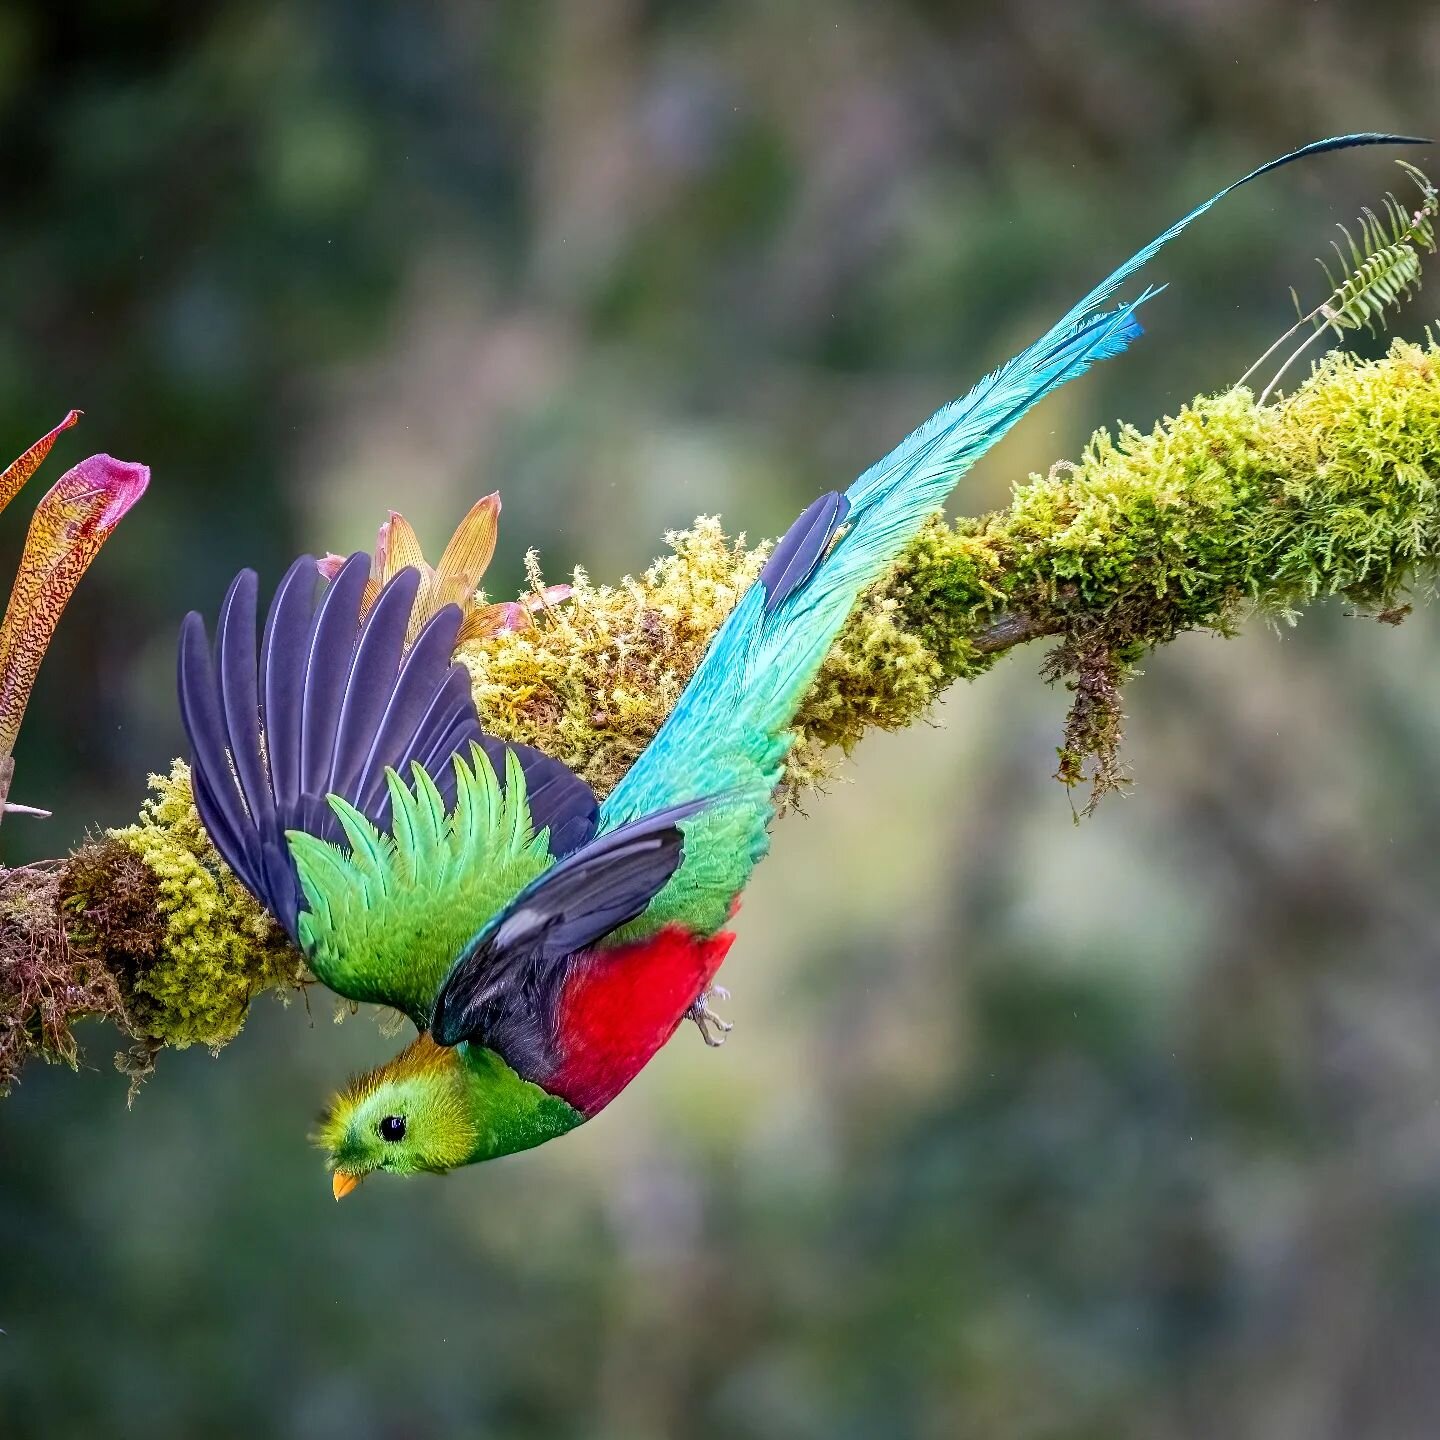 Resplendent Quetzals are startling emerald jewels of the cloud forest. They shimmer from one shade to another, blending almost magically with the wet green background of their constantly misty high altitude homes. Their color seems ephemeral for a re